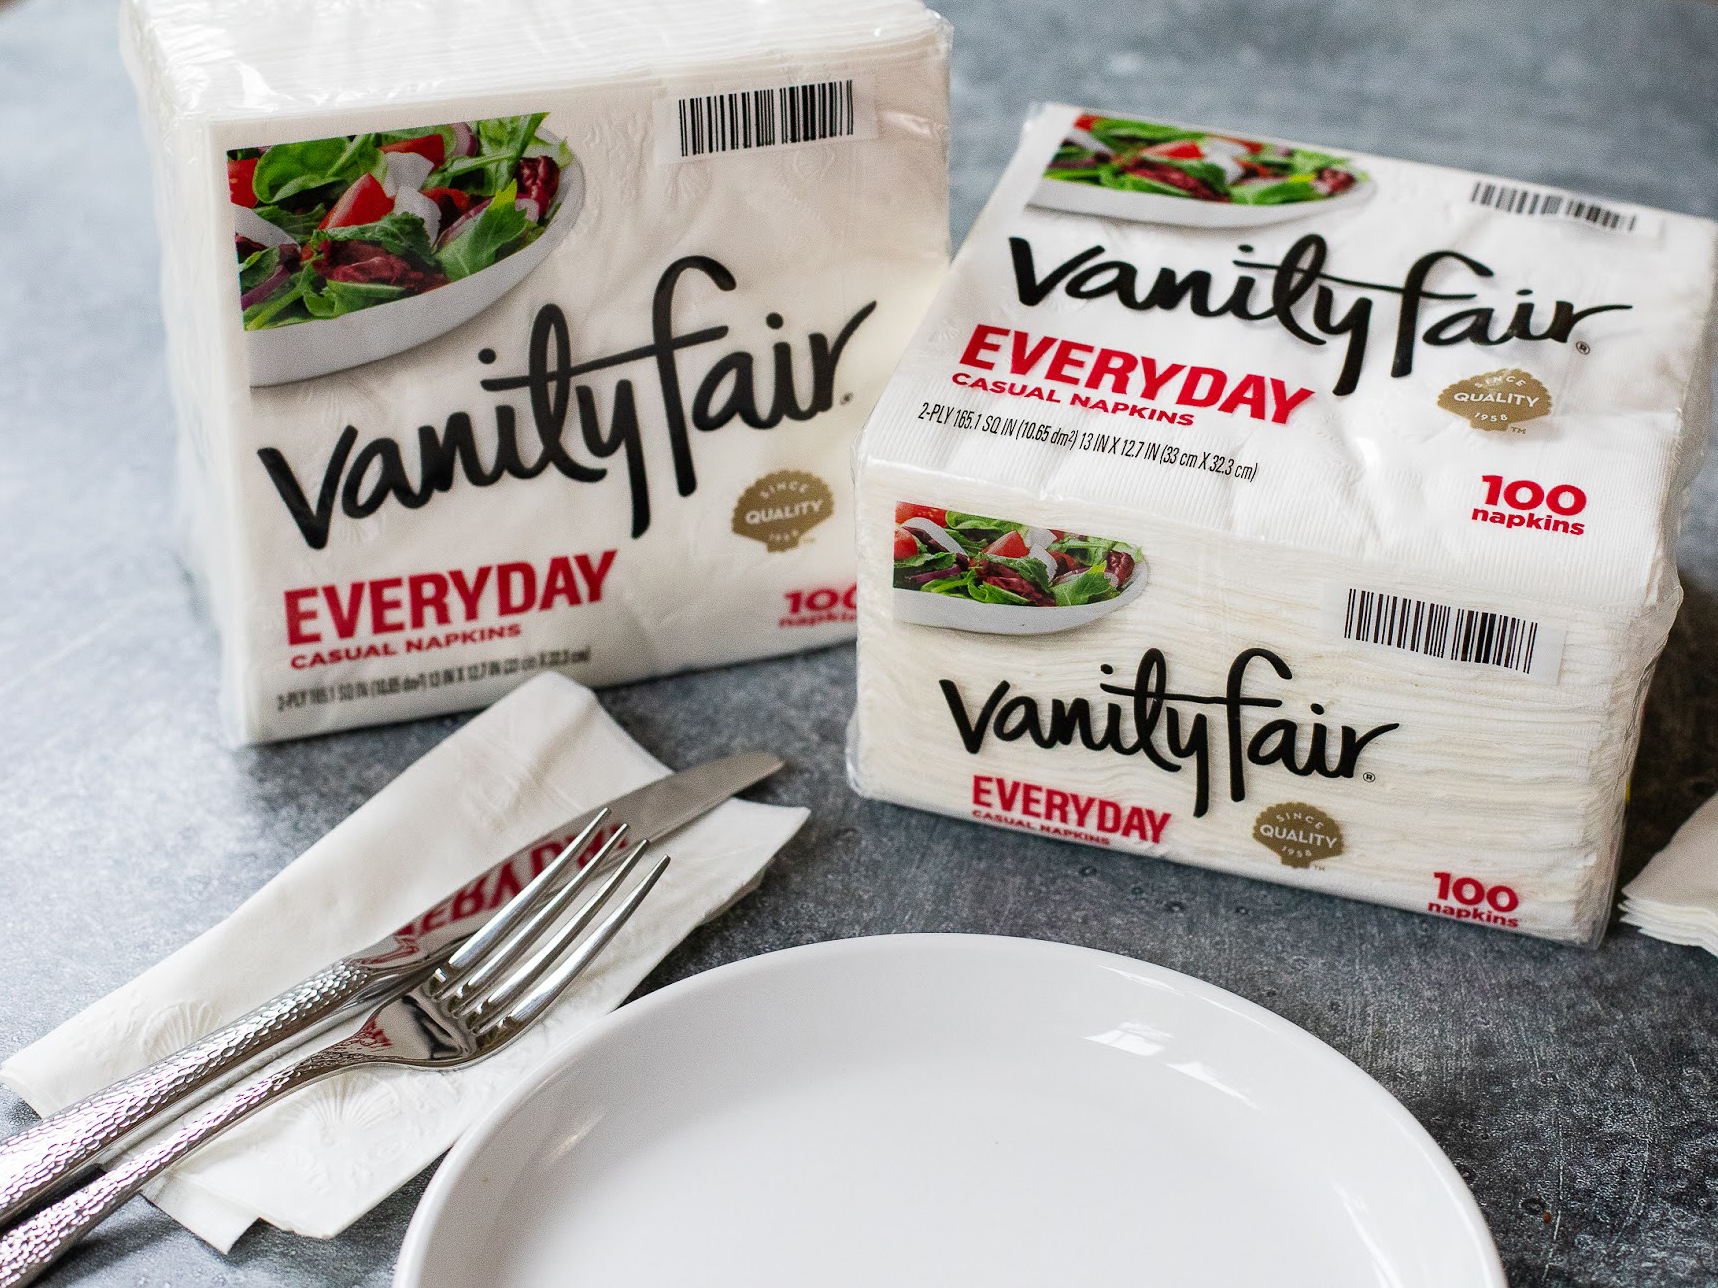 Vanity Fair Everyday Napkins Are As Low As 75¢ Per Pack At Publix